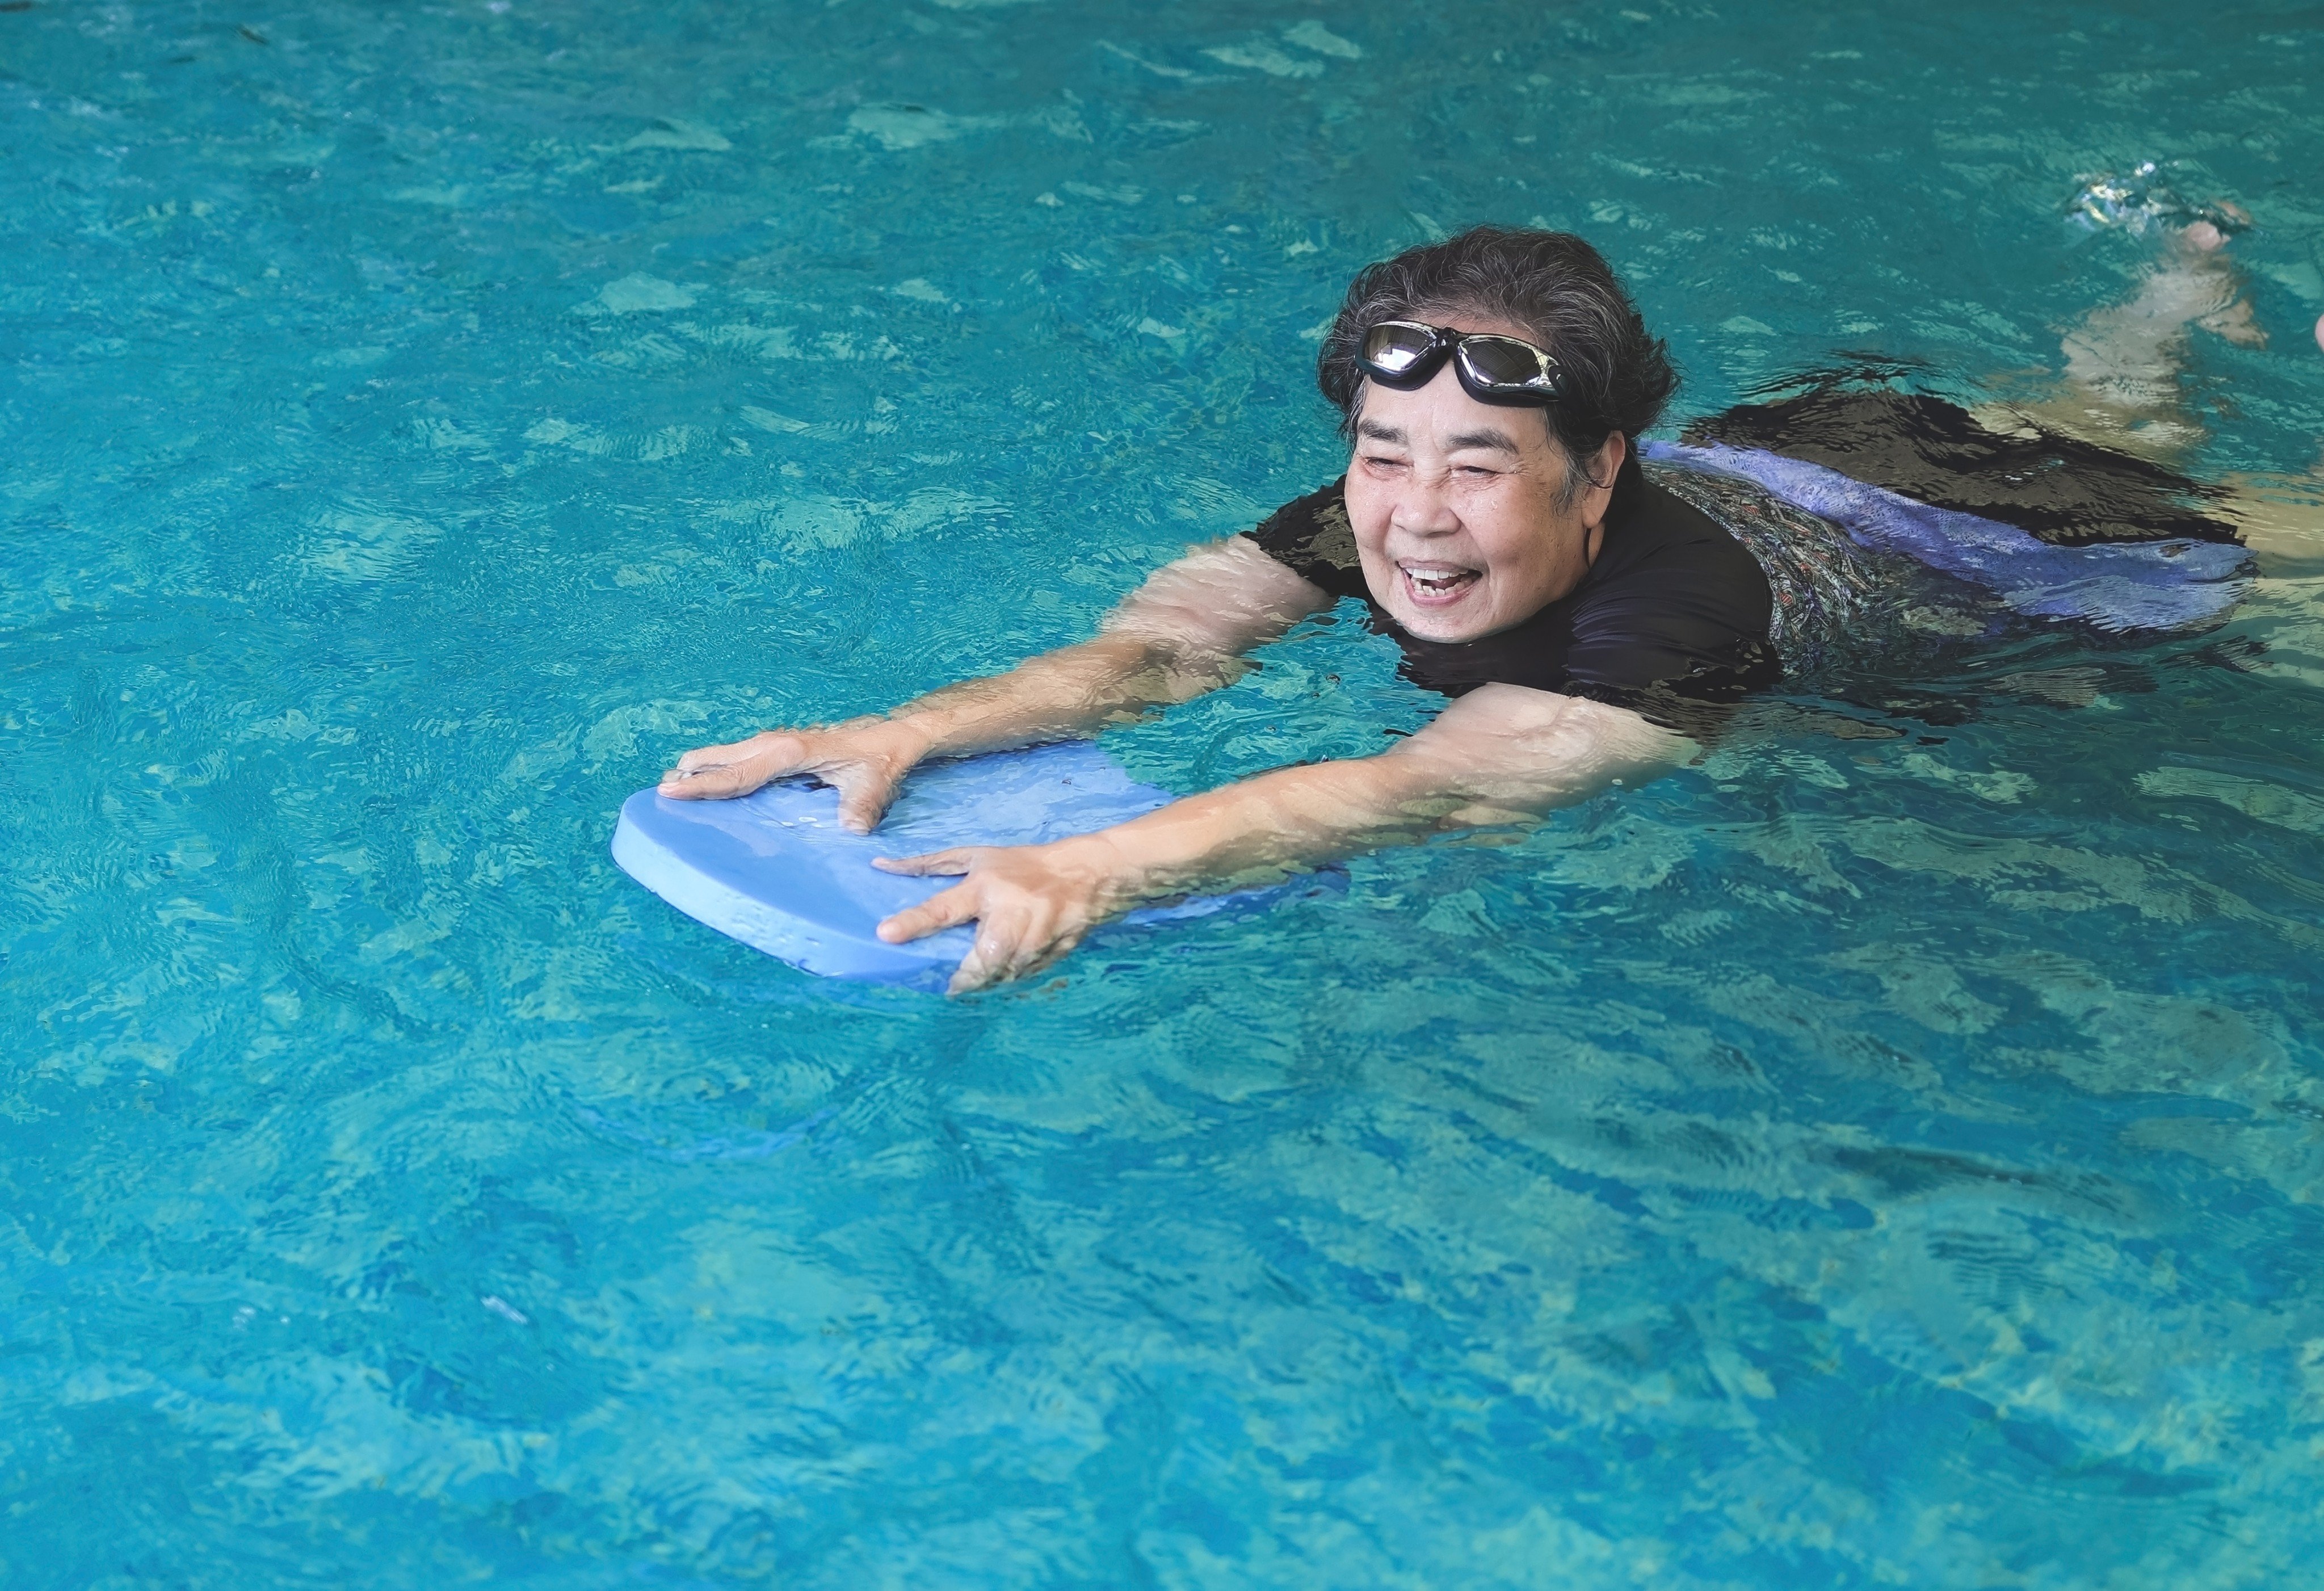 It’s never too late to start exercising, such as taking up swimming (above), says a report by Chinese and American researchers. Worldwide, 1.8 billion people of all ages are not getting the recommended amount of exercise, risking ill-health, a World Health Organization report says. Photo: Shutterstock